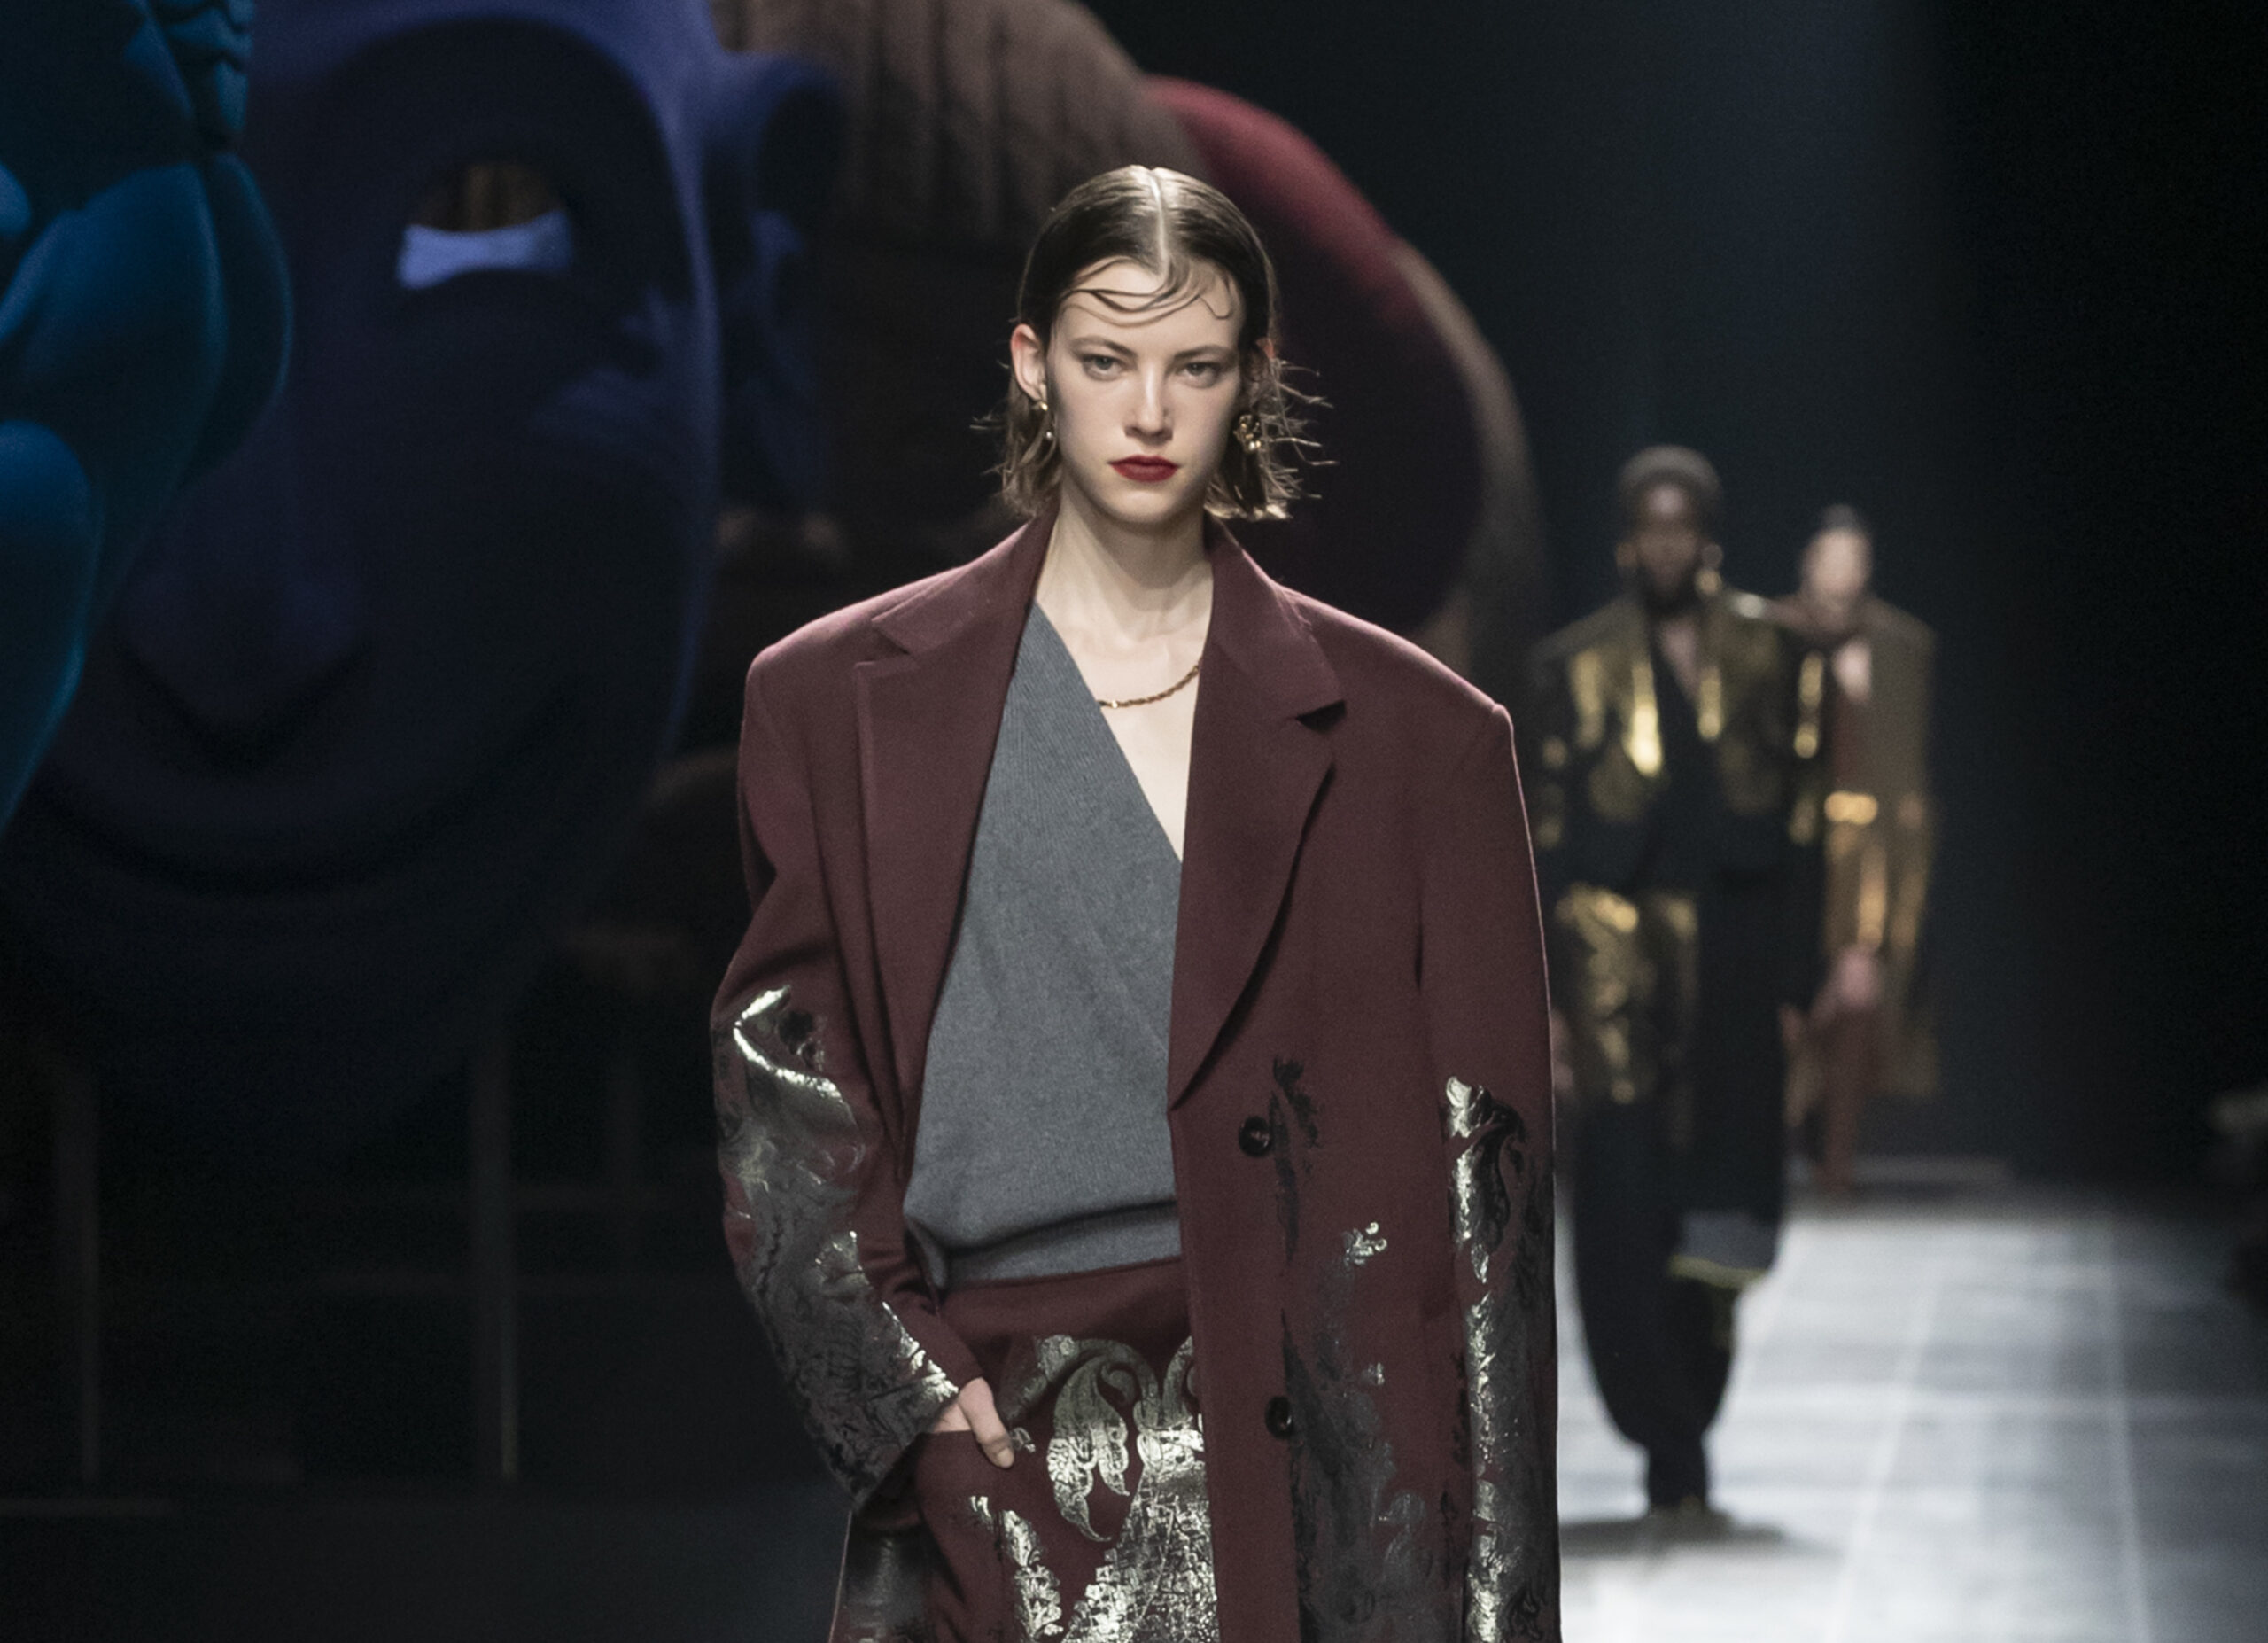 A model walks the runway in a layered outfit from Etro's Fall/Winter 2024/2025 collection, featuring a maroon coat with silver accents.